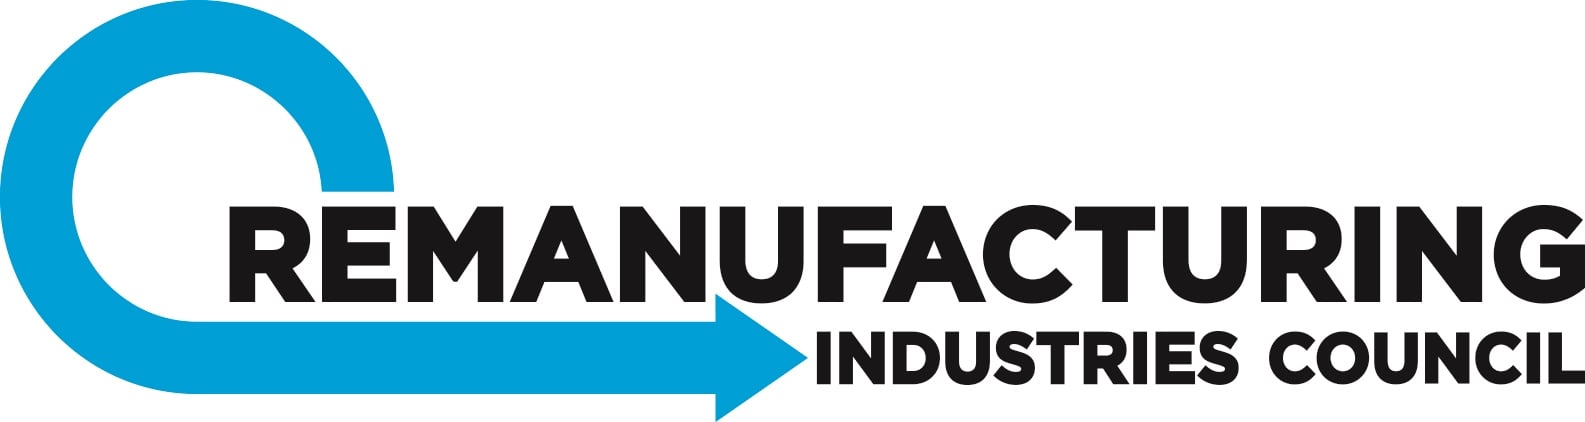 remanufacturing industries council logo